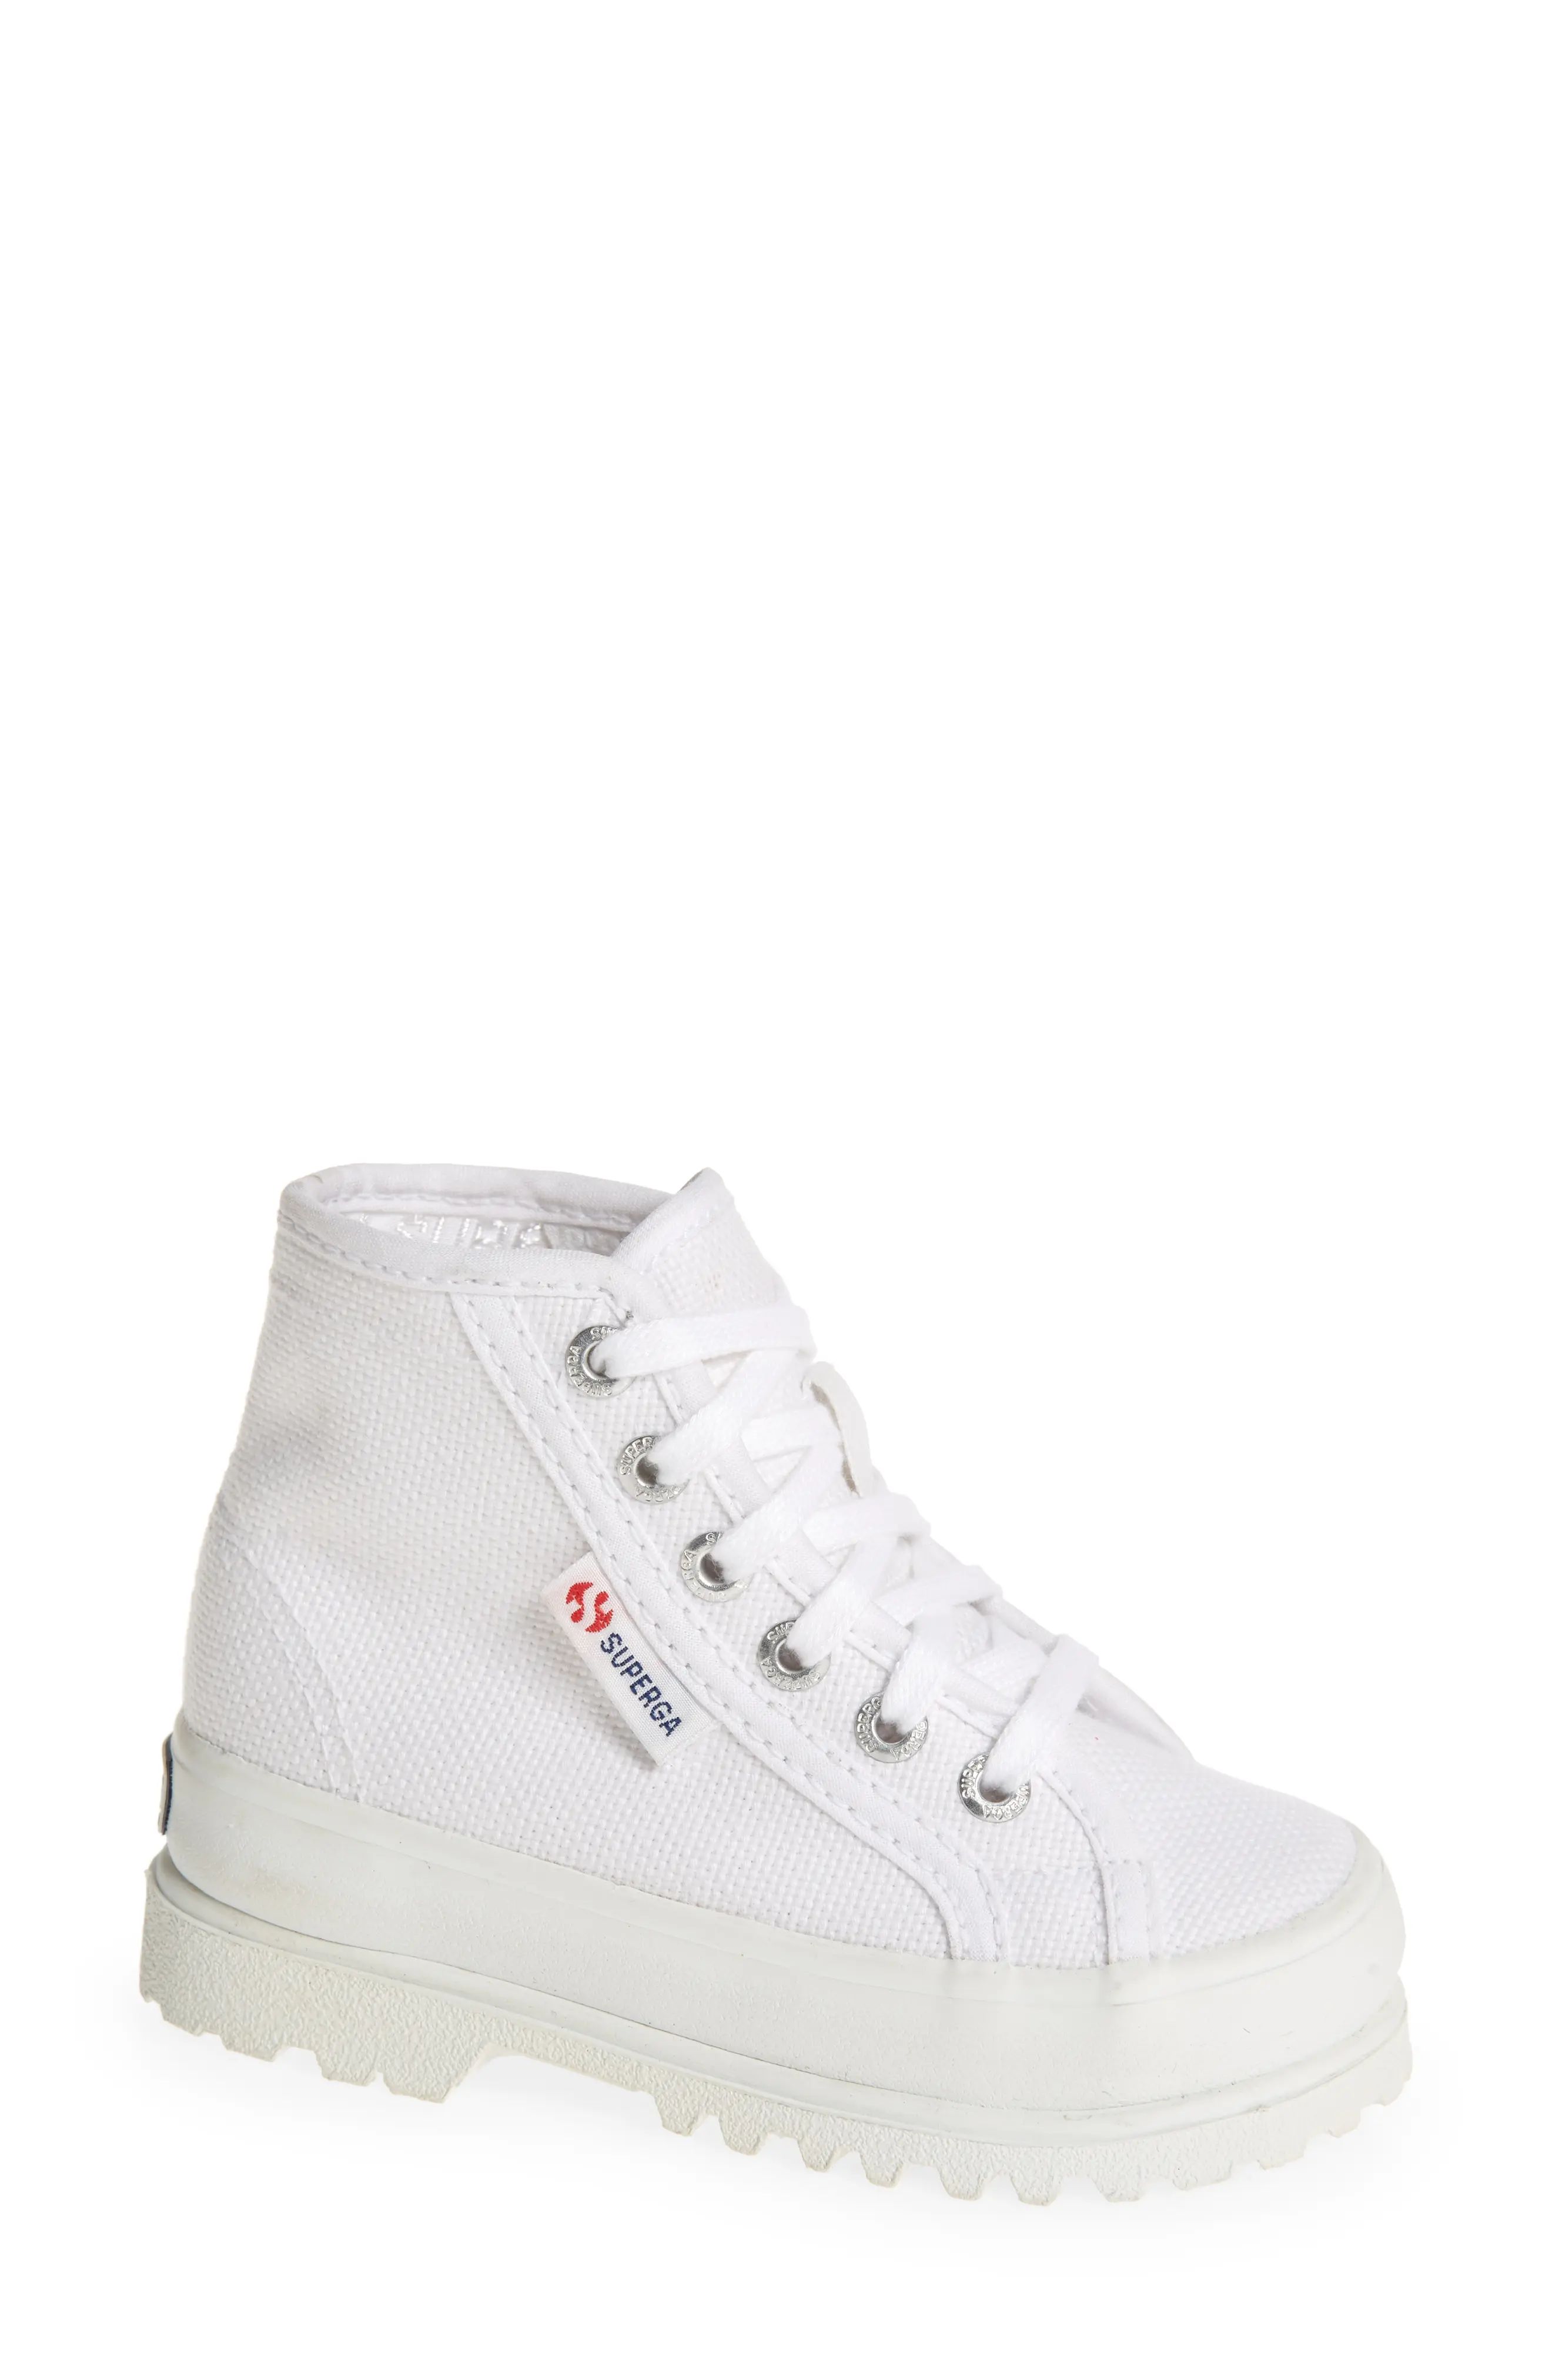 Superga 2966 Alpina High Top Sneaker in White at Nordstrom, Size 10.5Us | Nordstrom